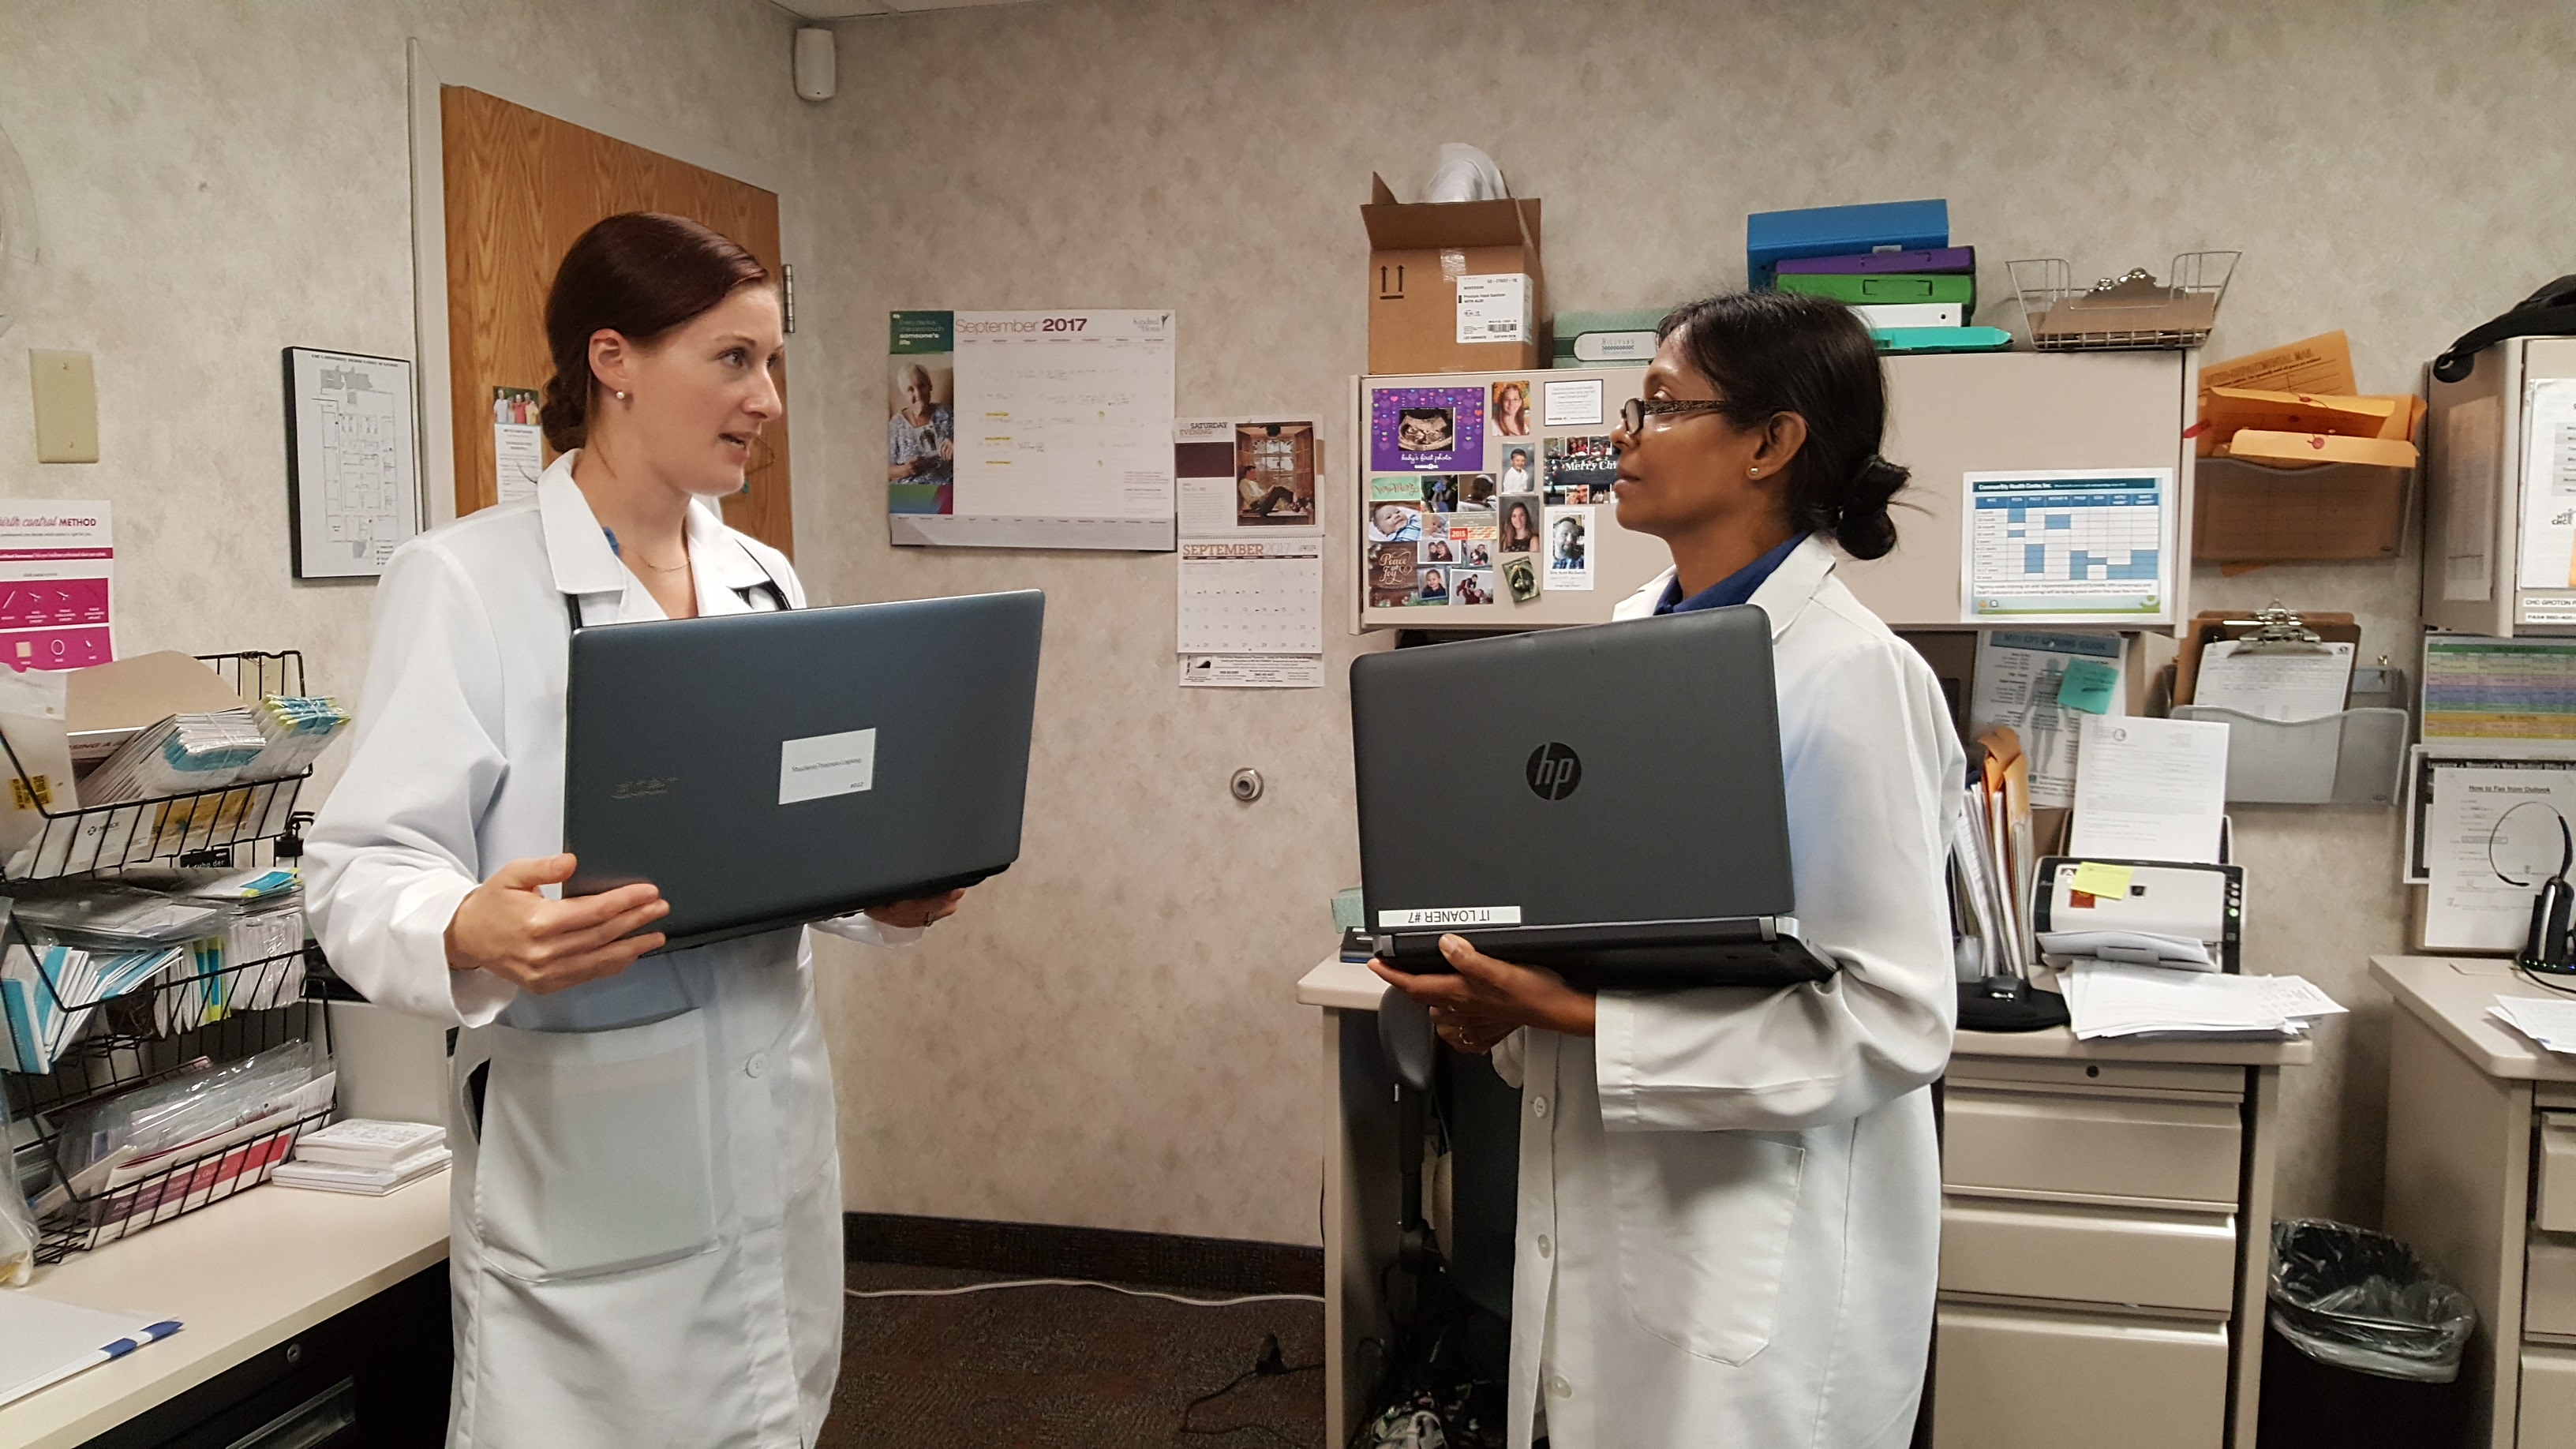 Two women in white coats talking to each other holding laptops in a doctors office